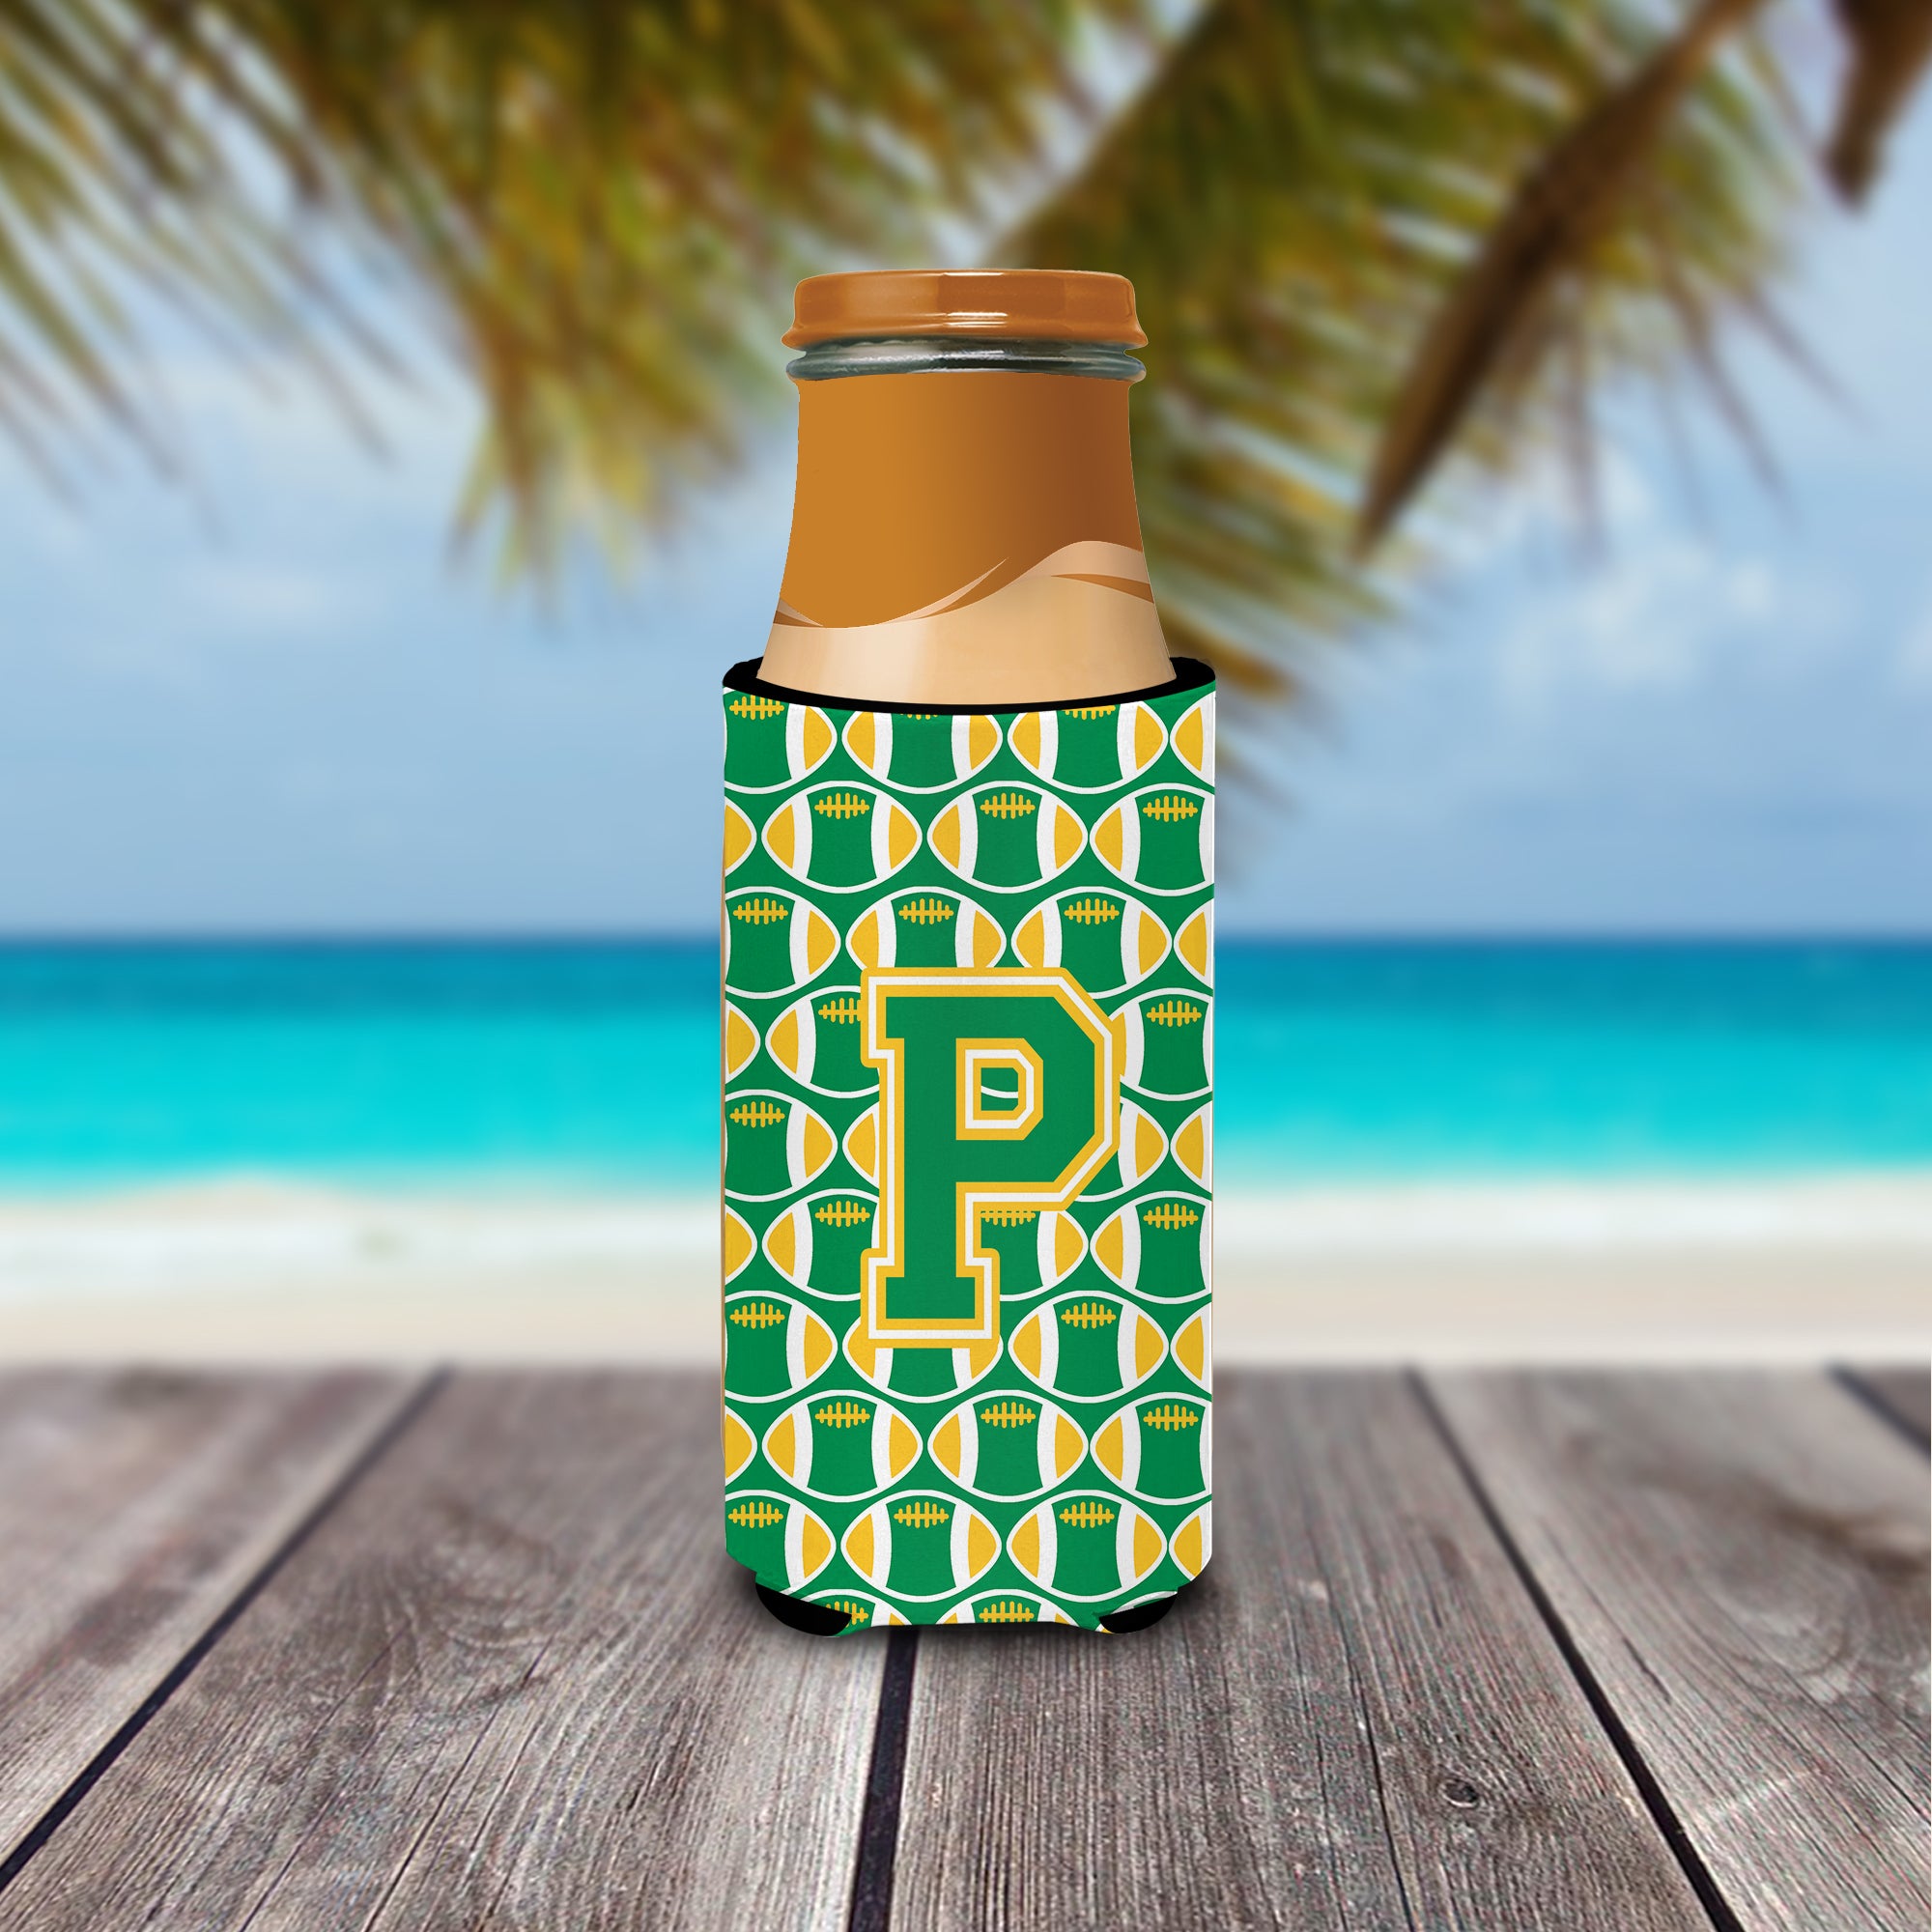 Letter P Football Green and Gold Ultra Beverage Insulators for slim cans CJ1069-PMUK.